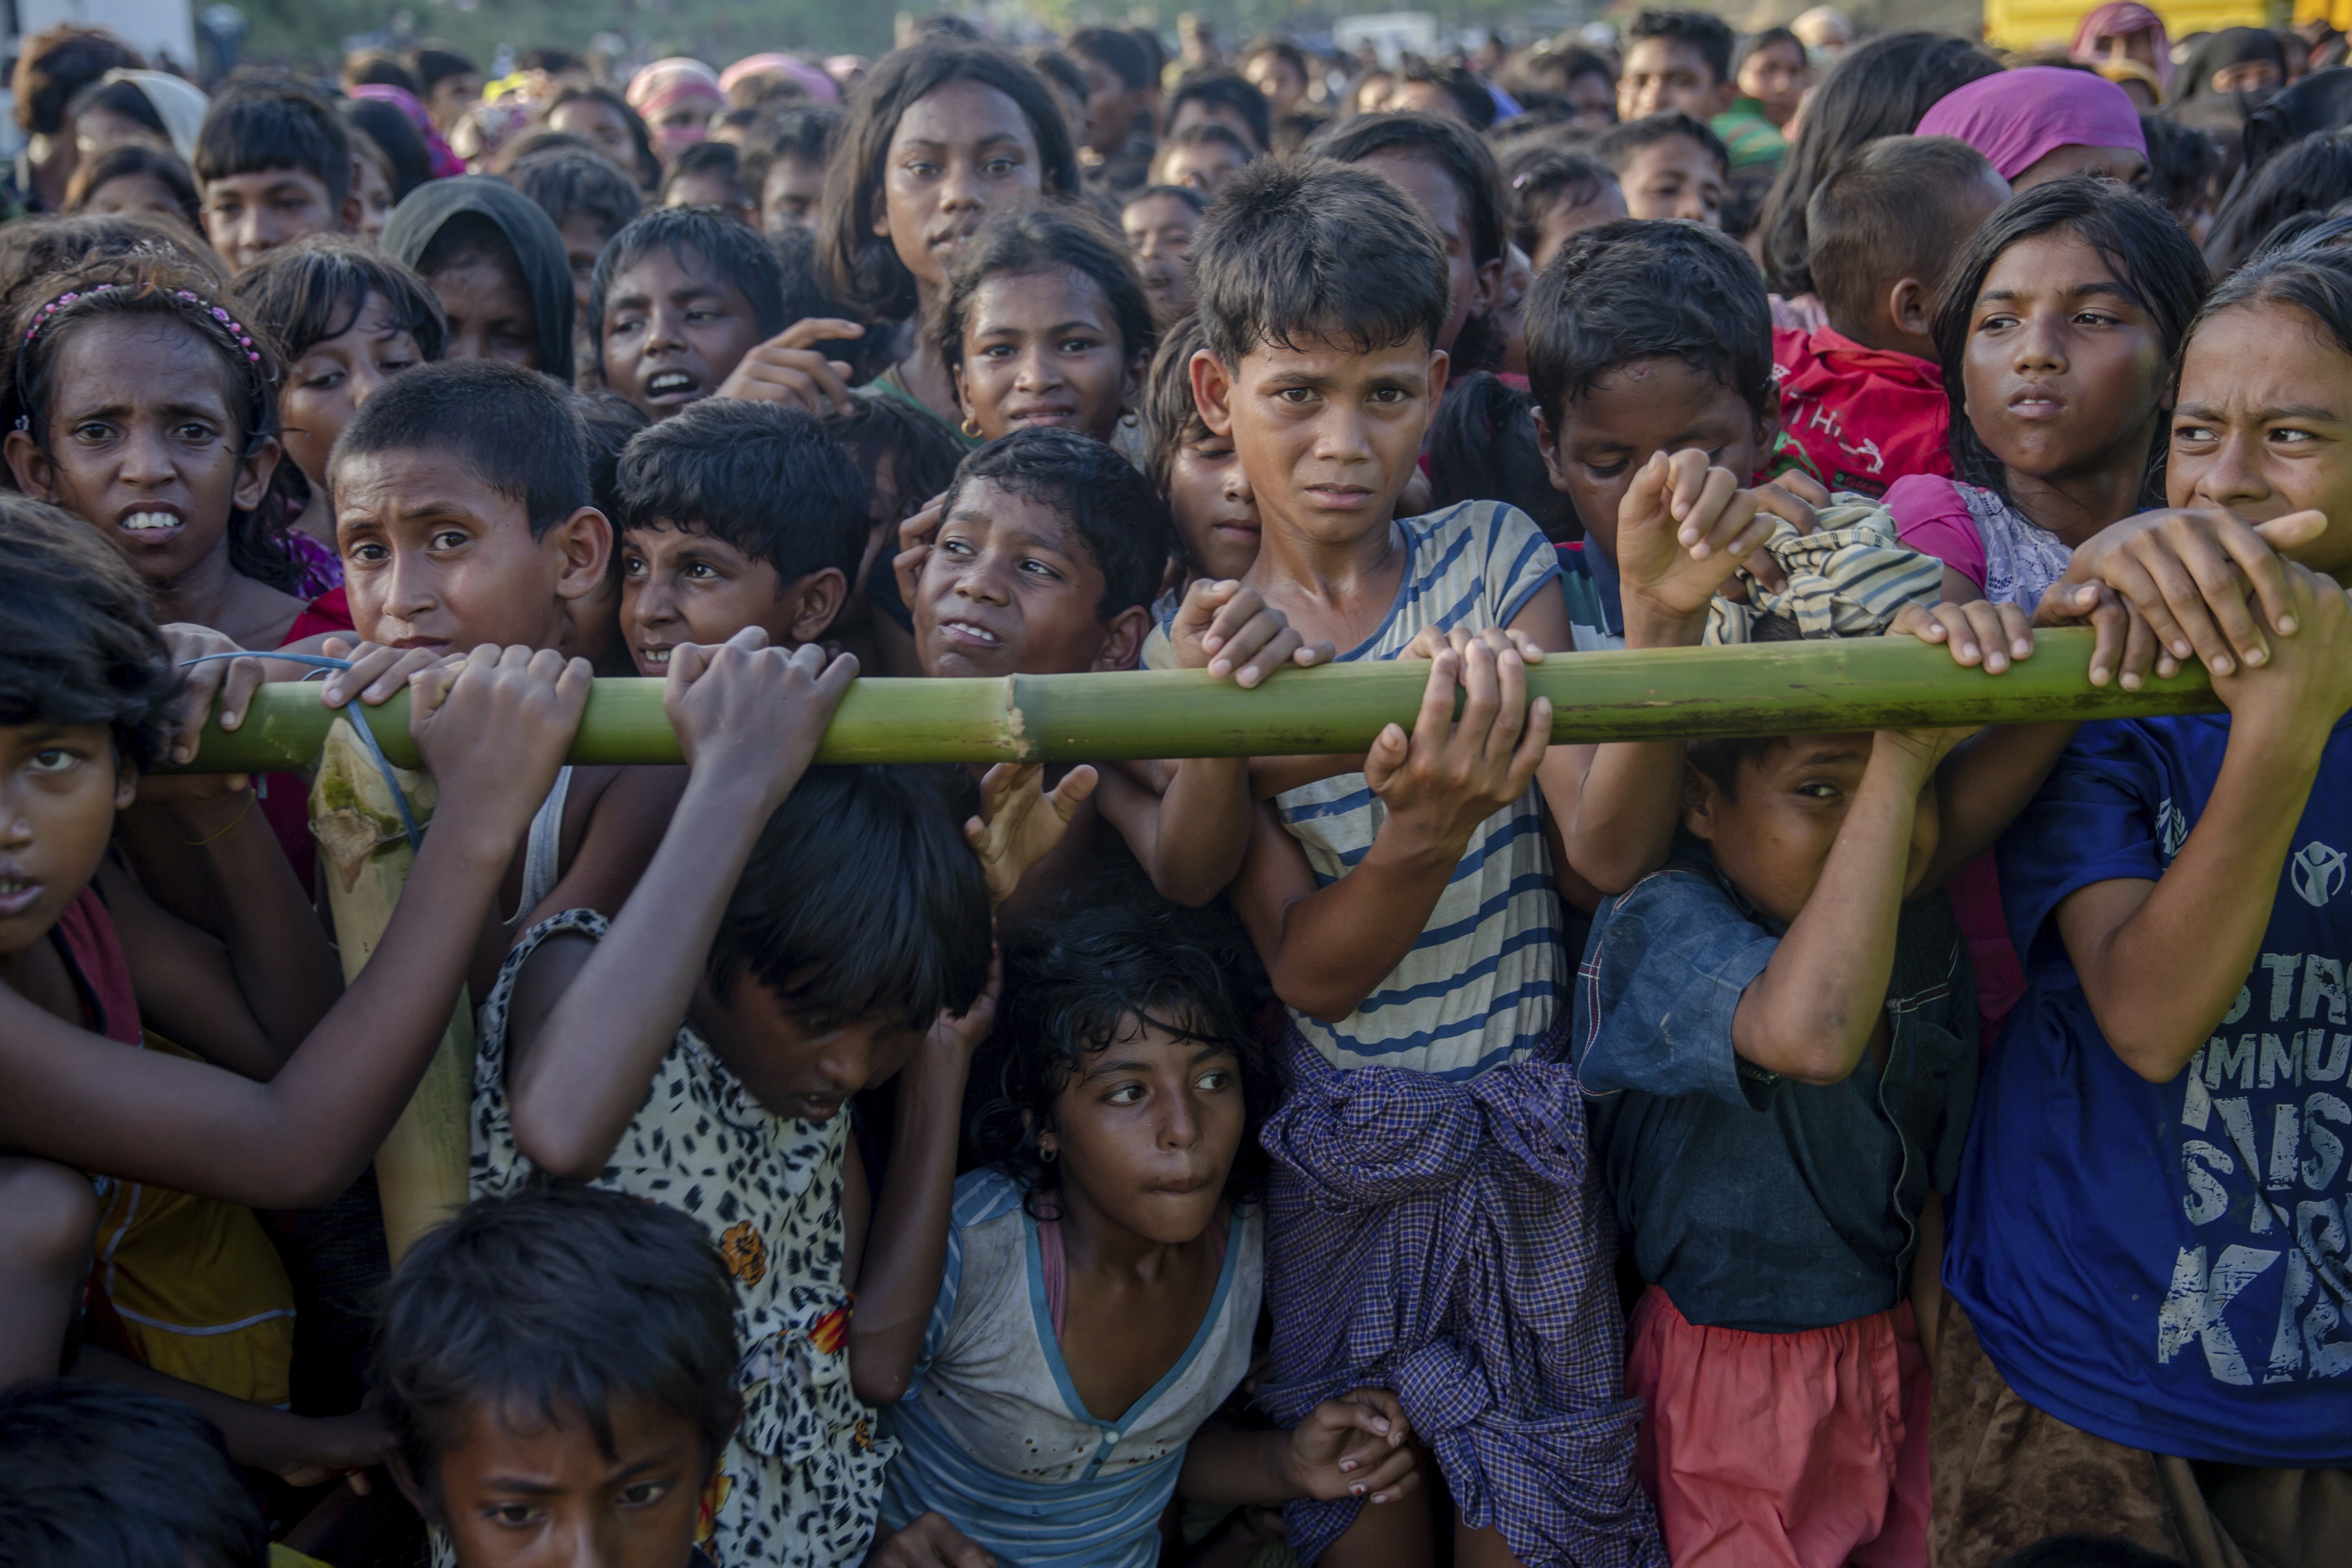 The Southeast Asian nation is no stranger to internal conflicts, but one thing that unites its citizens, even in the face of international condemnation, is that the Muslim Rohingya will never call their country home